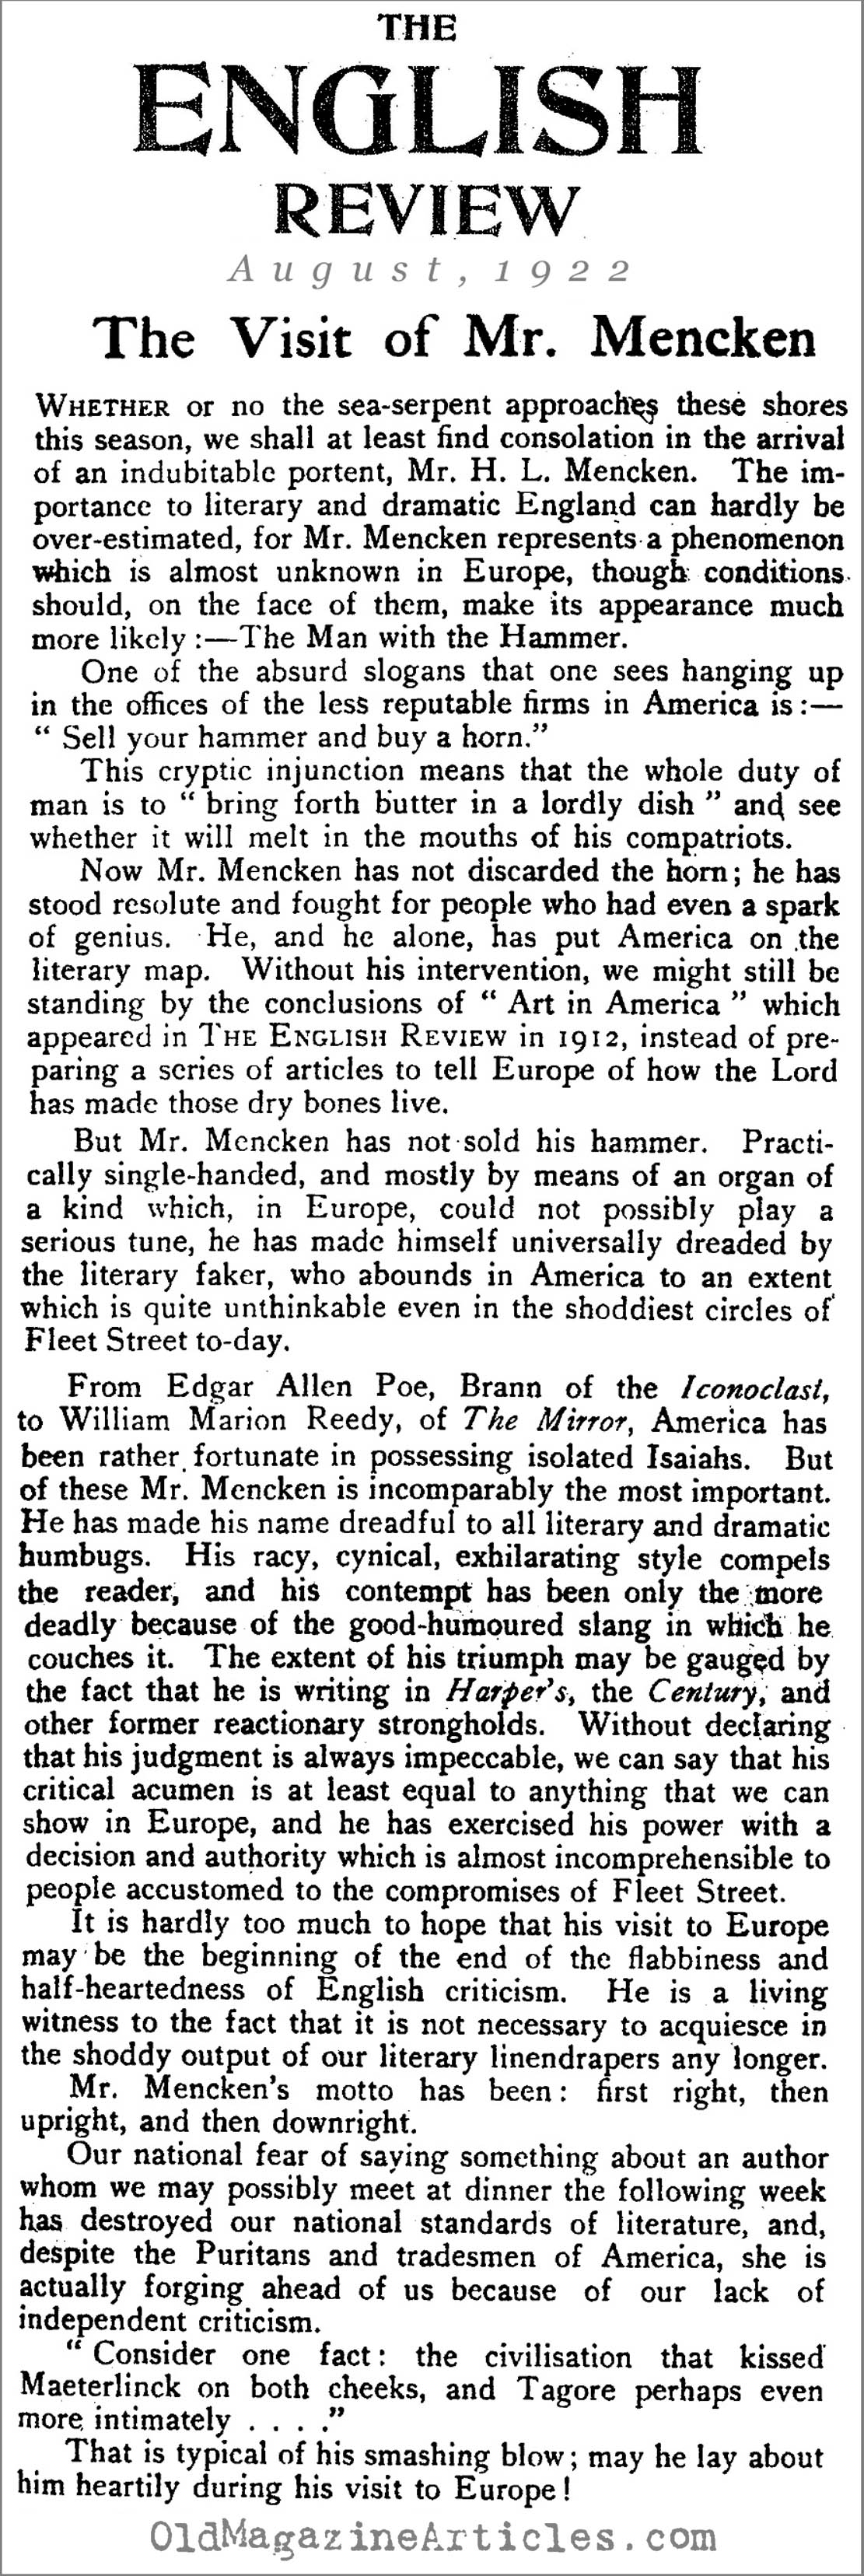 A Profile of H.L. Mencken  (The English Review, 1922)